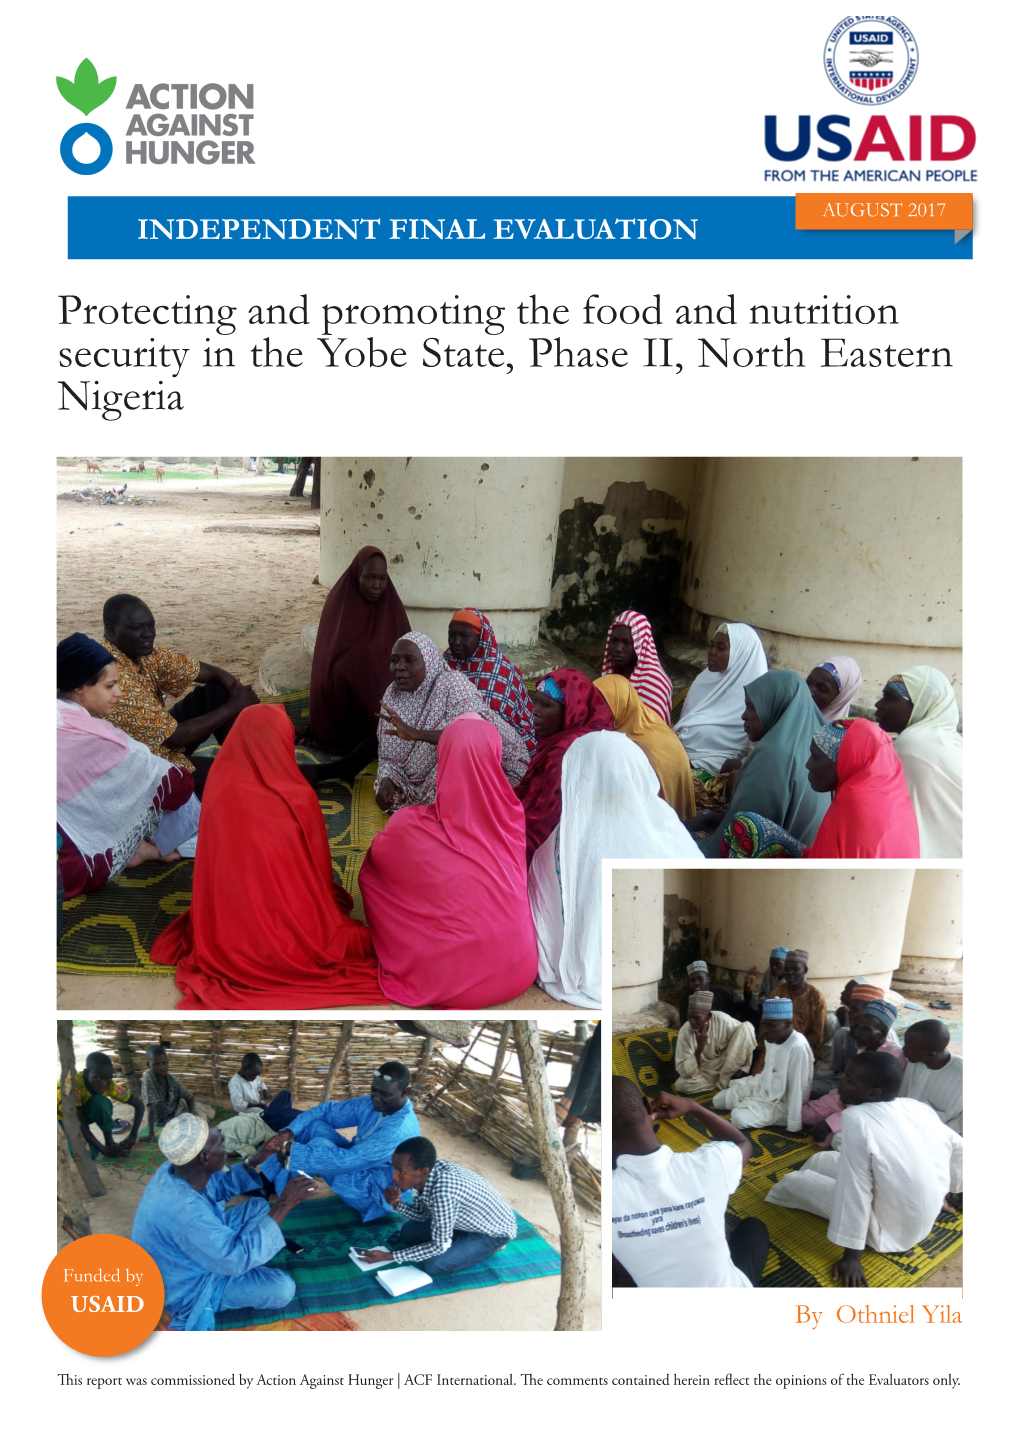 Protecting and Promoting the Food and Nutrition Security in the Yobe State, Phase II, North Eastern Nigeria